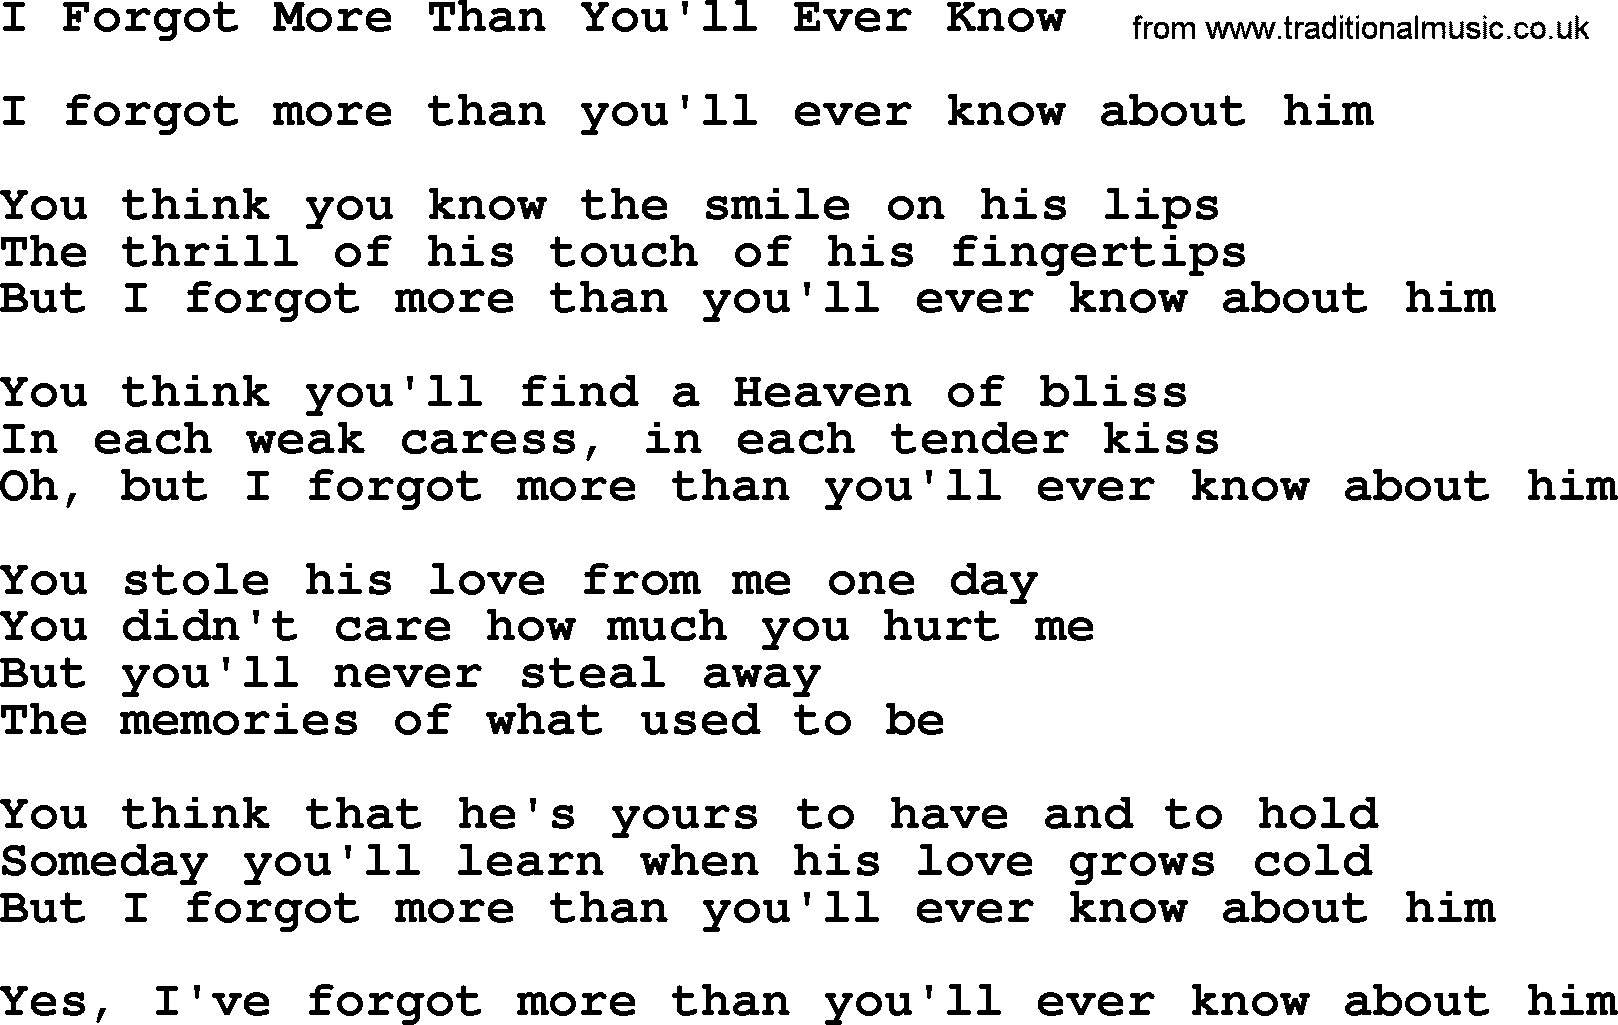 Dolly Parton song I Forgot More Than You'll Ever Know.txt lyrics